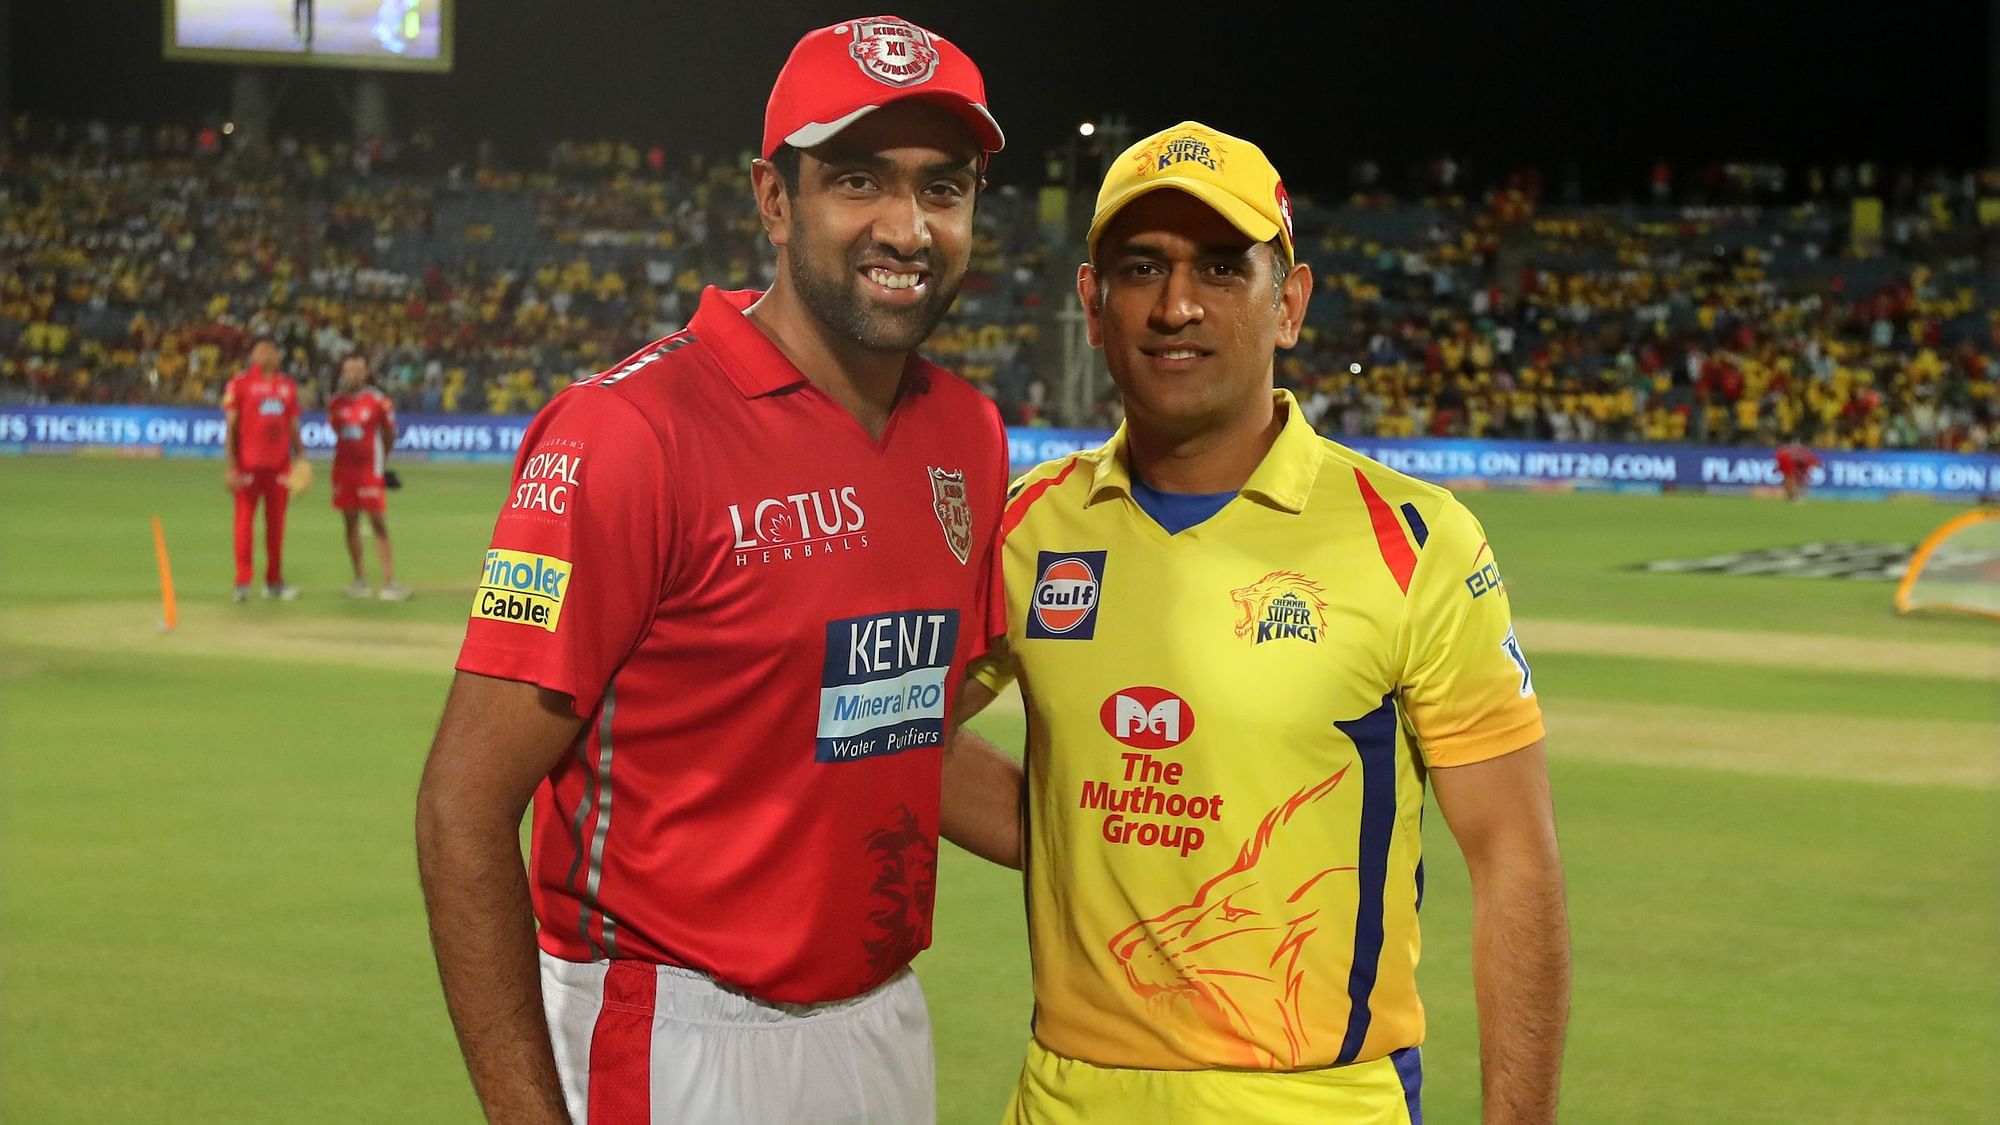 MS Dhoni’s ability to stay calm in the trickiest of situations versus R Ashwin’s aggressive approach would certainly make for an interesting contest.